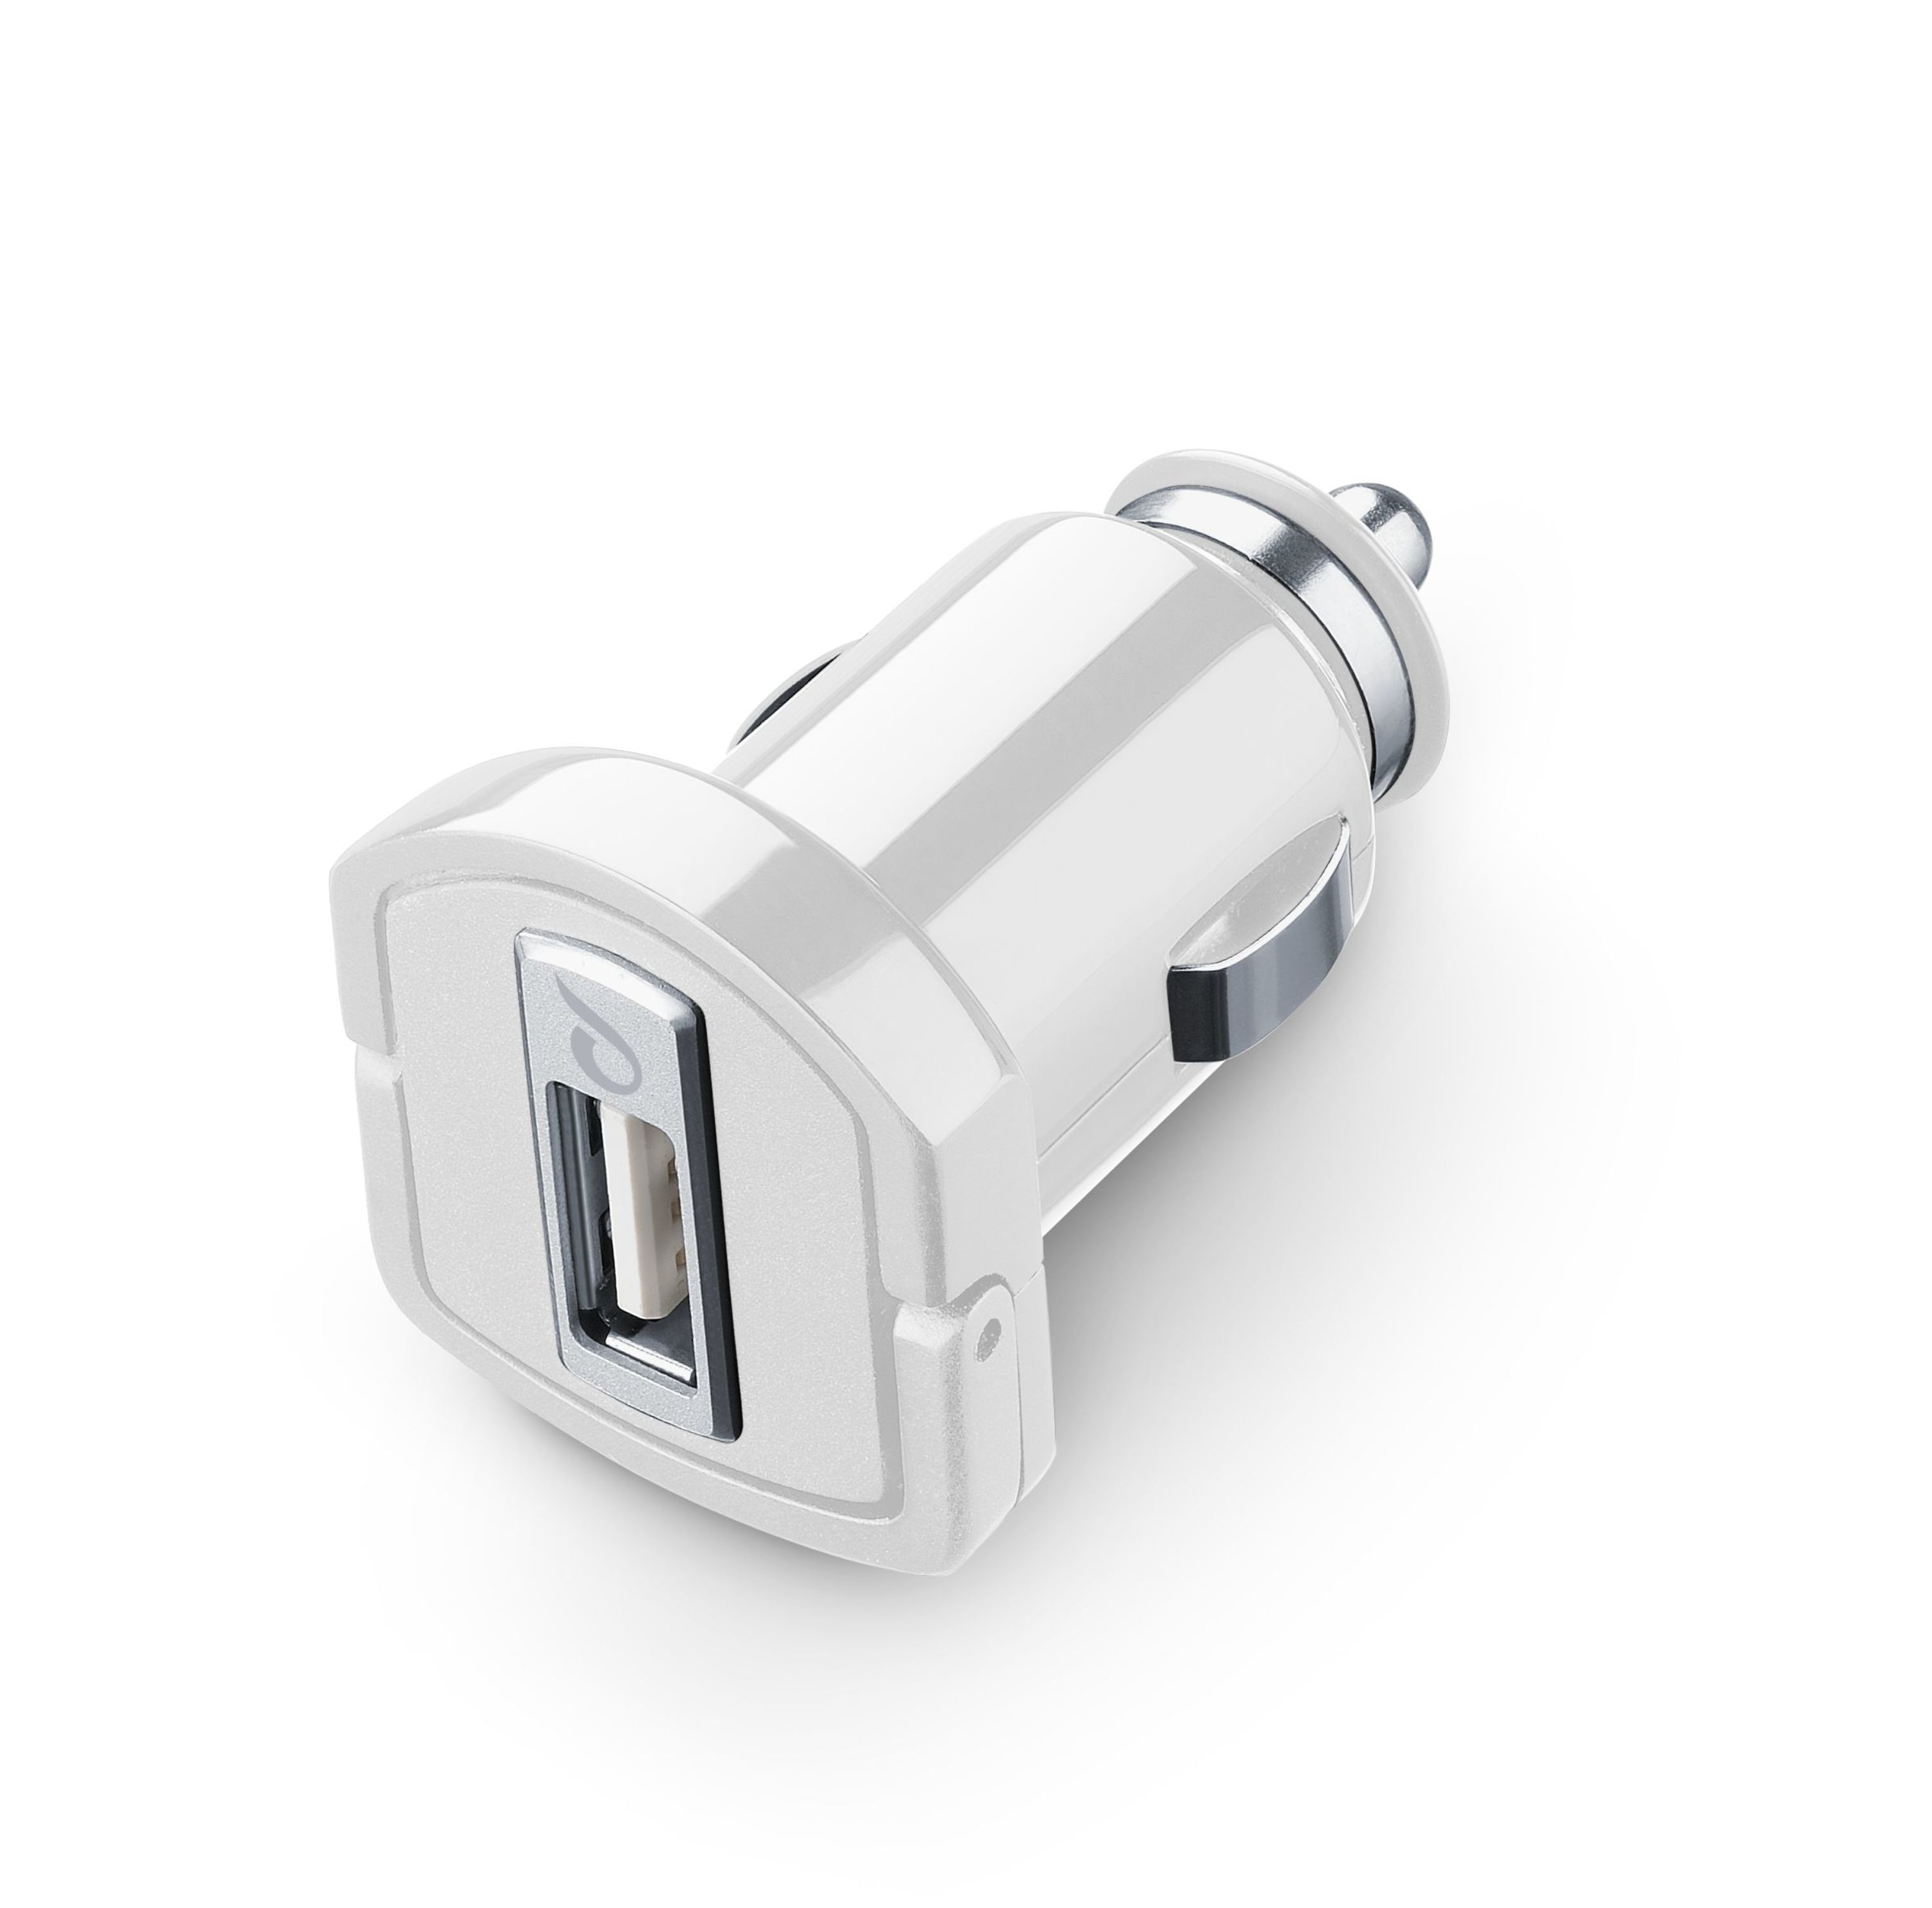 Car charger usb, 5W/1A Apple, white